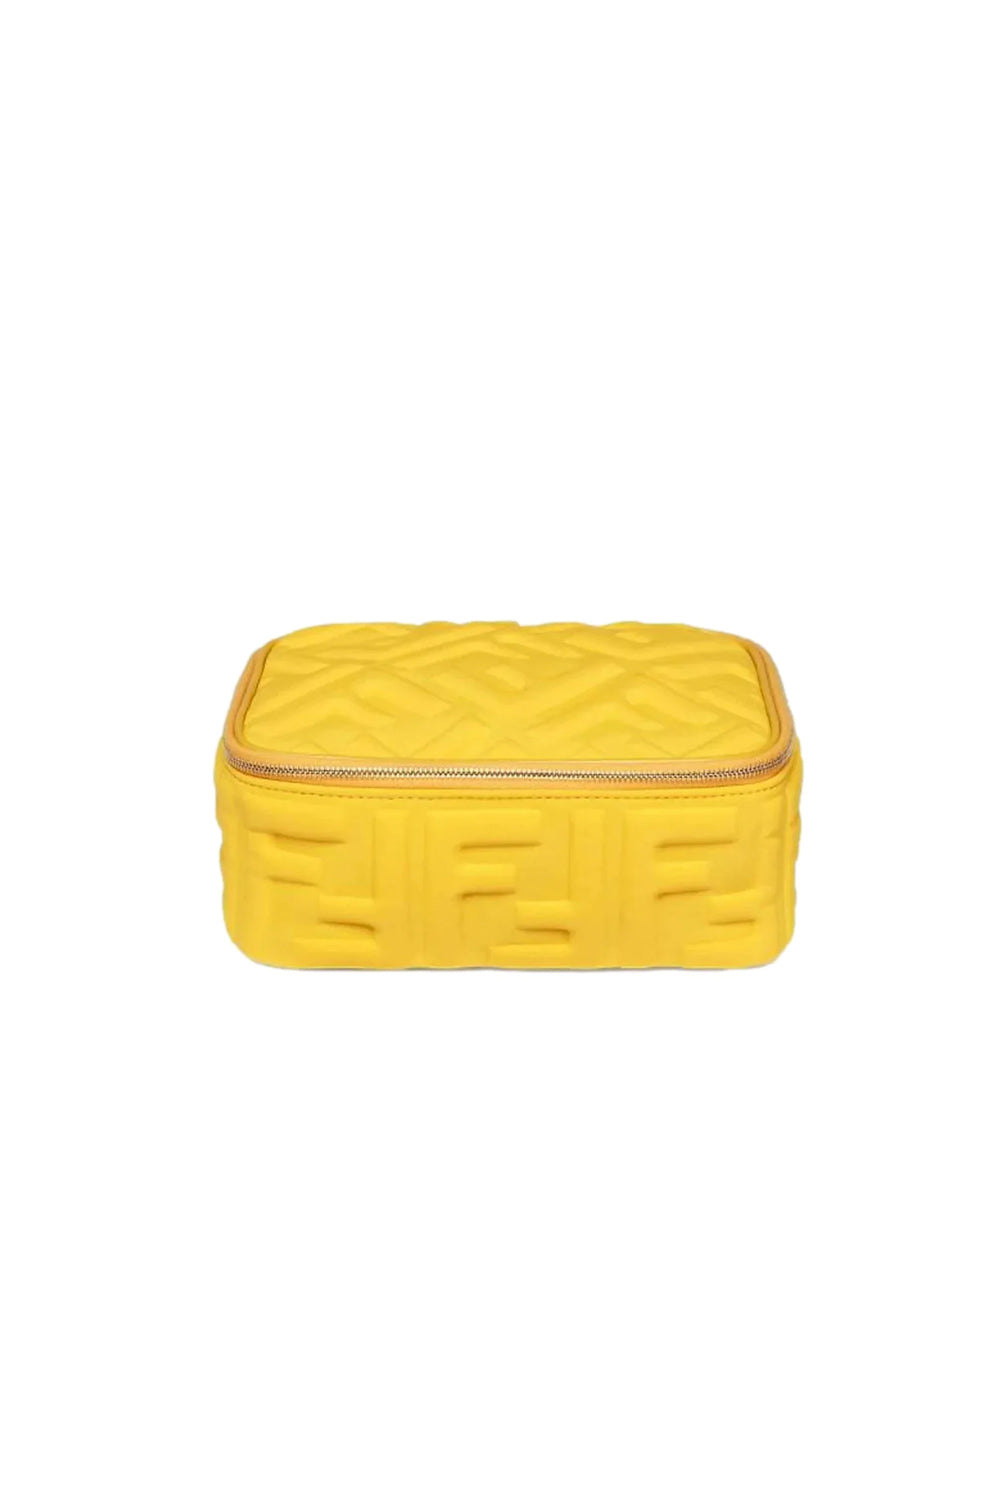 Fendi FF Embossed Lycra Small Yellow Cosmetic Case